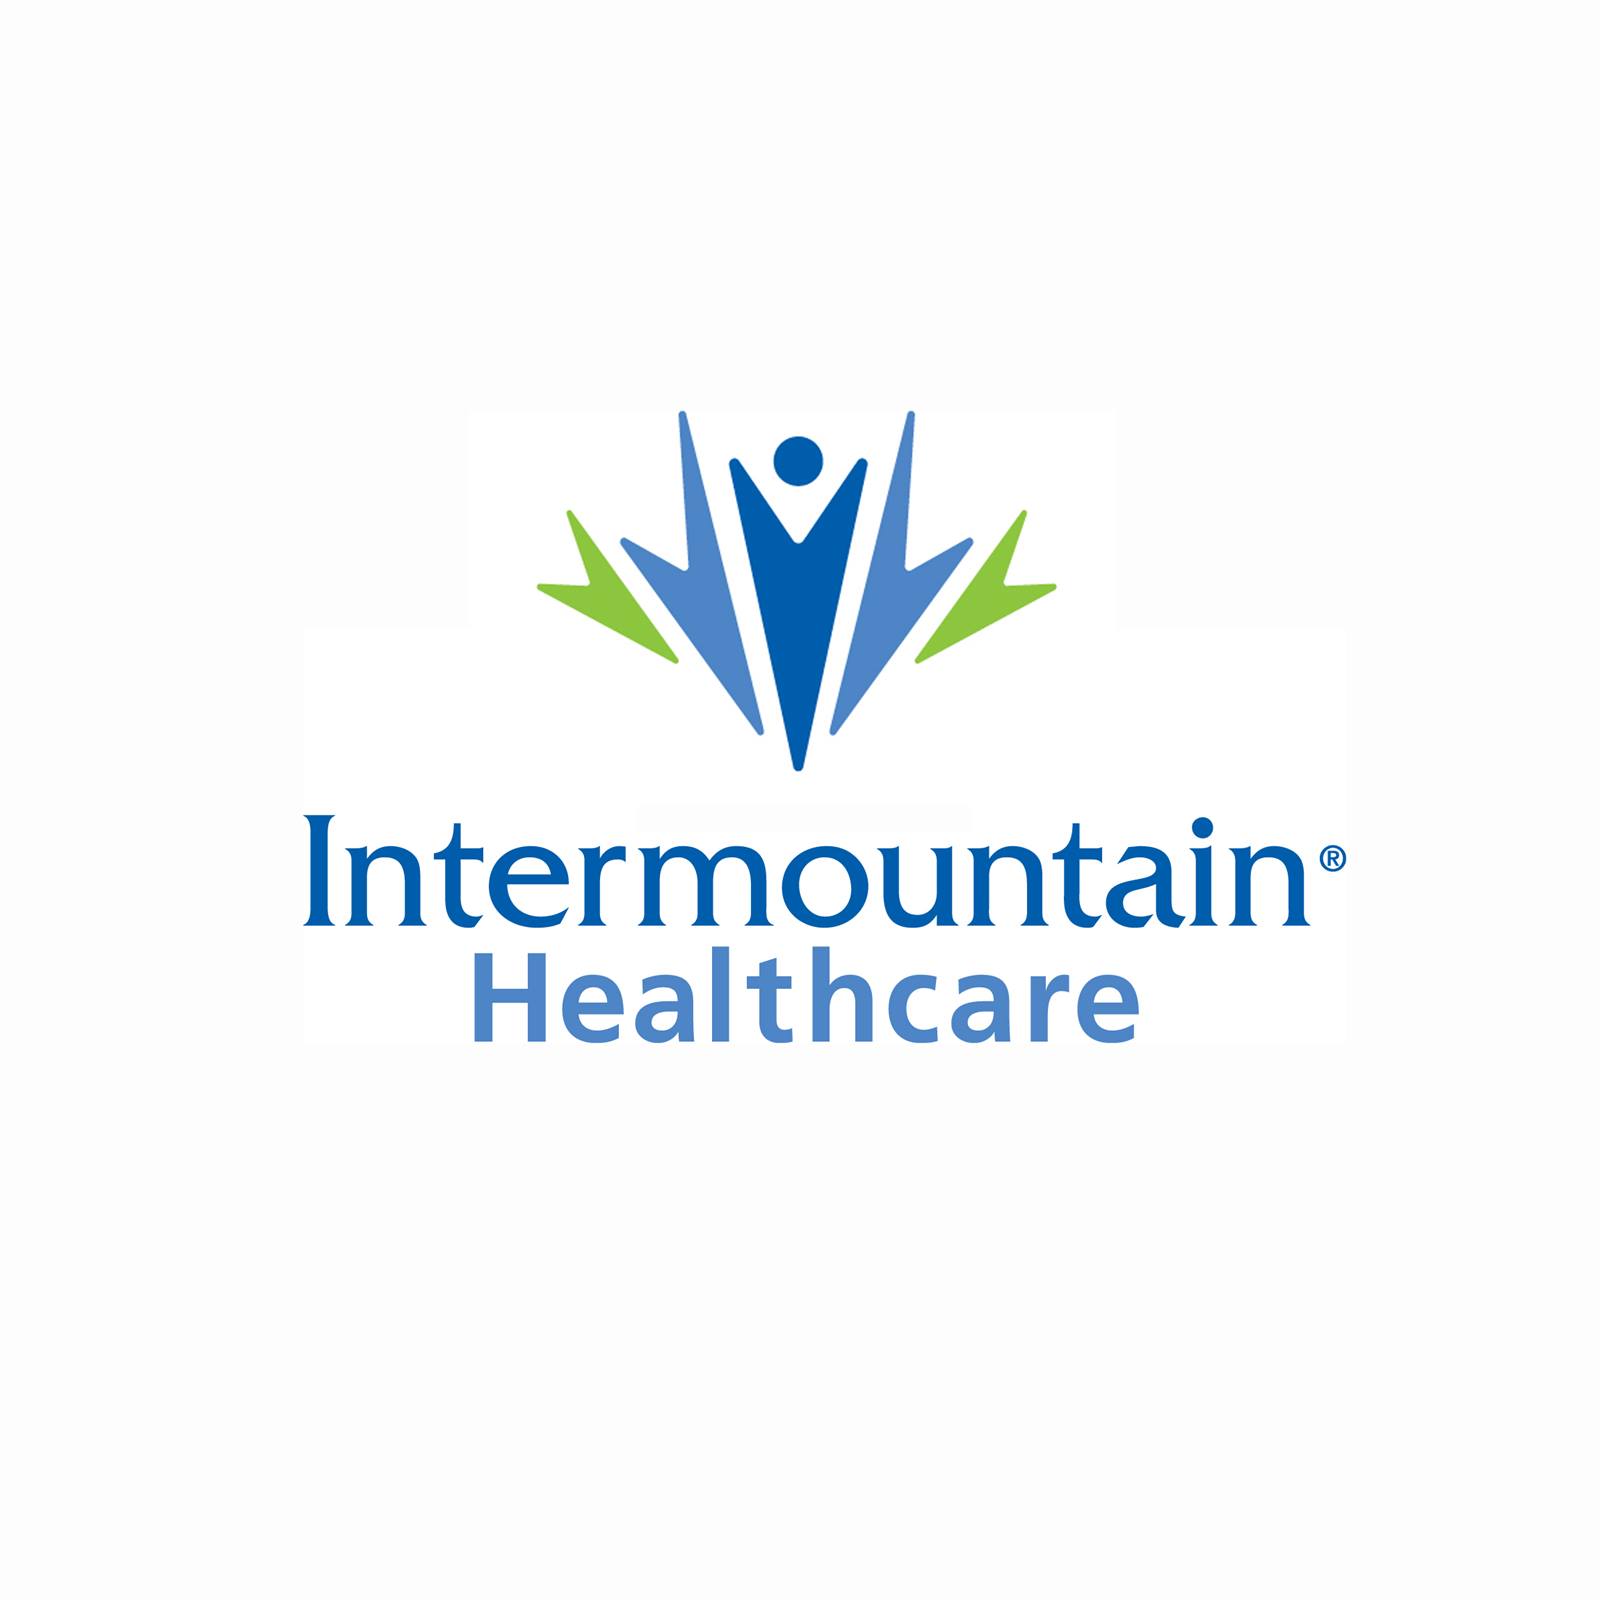 What is Intermountain Healthcare known for?